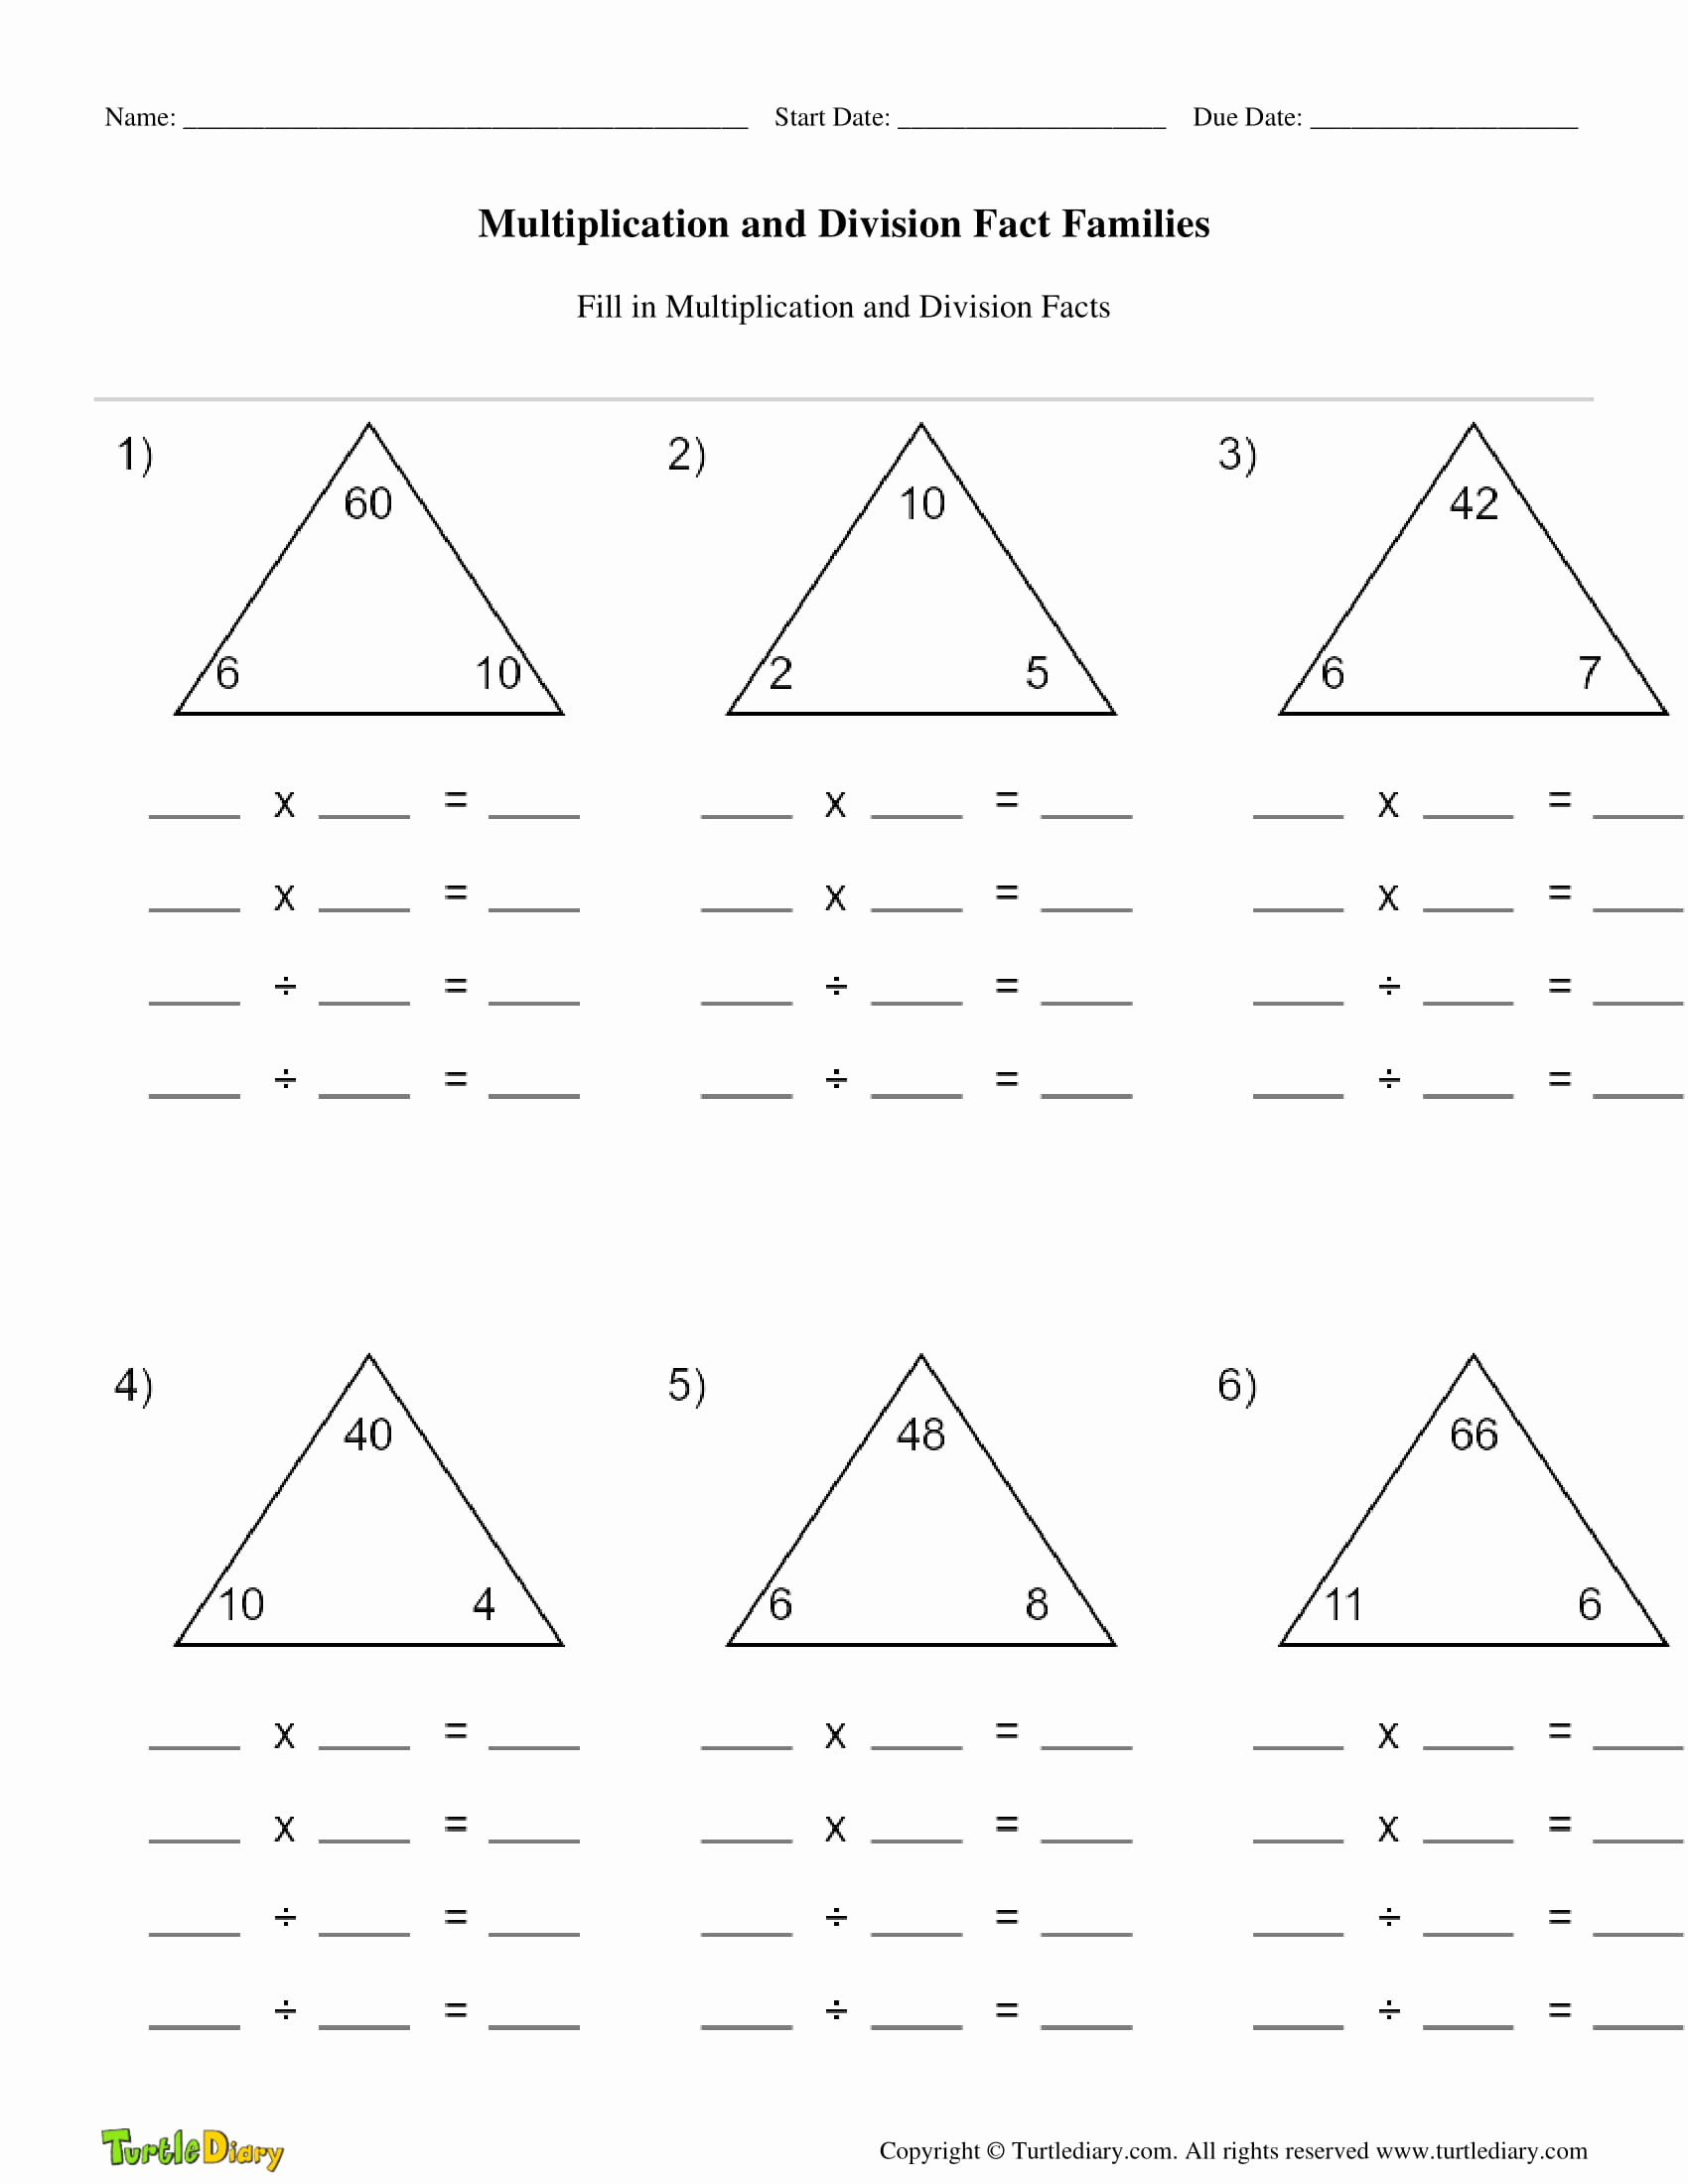 Multiplication Facts Worksheet Generator Luxury Multiplication and Division Fact Families